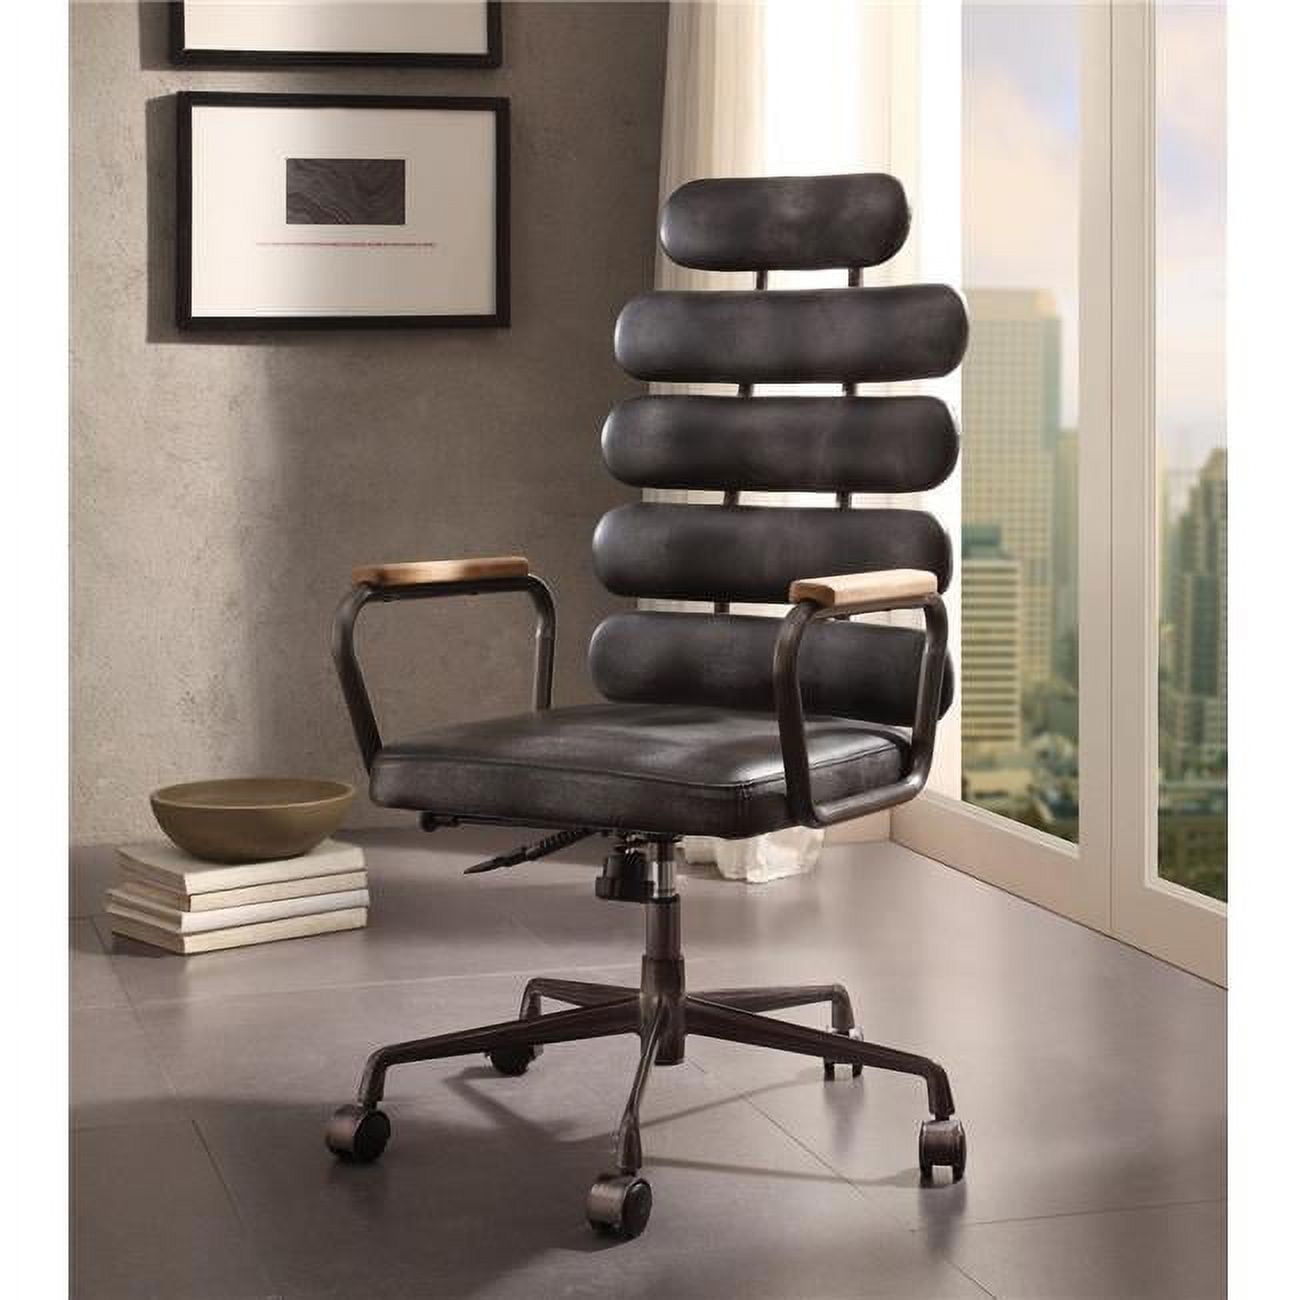 Picture of ACME 92107 Calan Executive Office Chair - Vintage Black Top Grain Leather - 42 x 22 x 27 in.